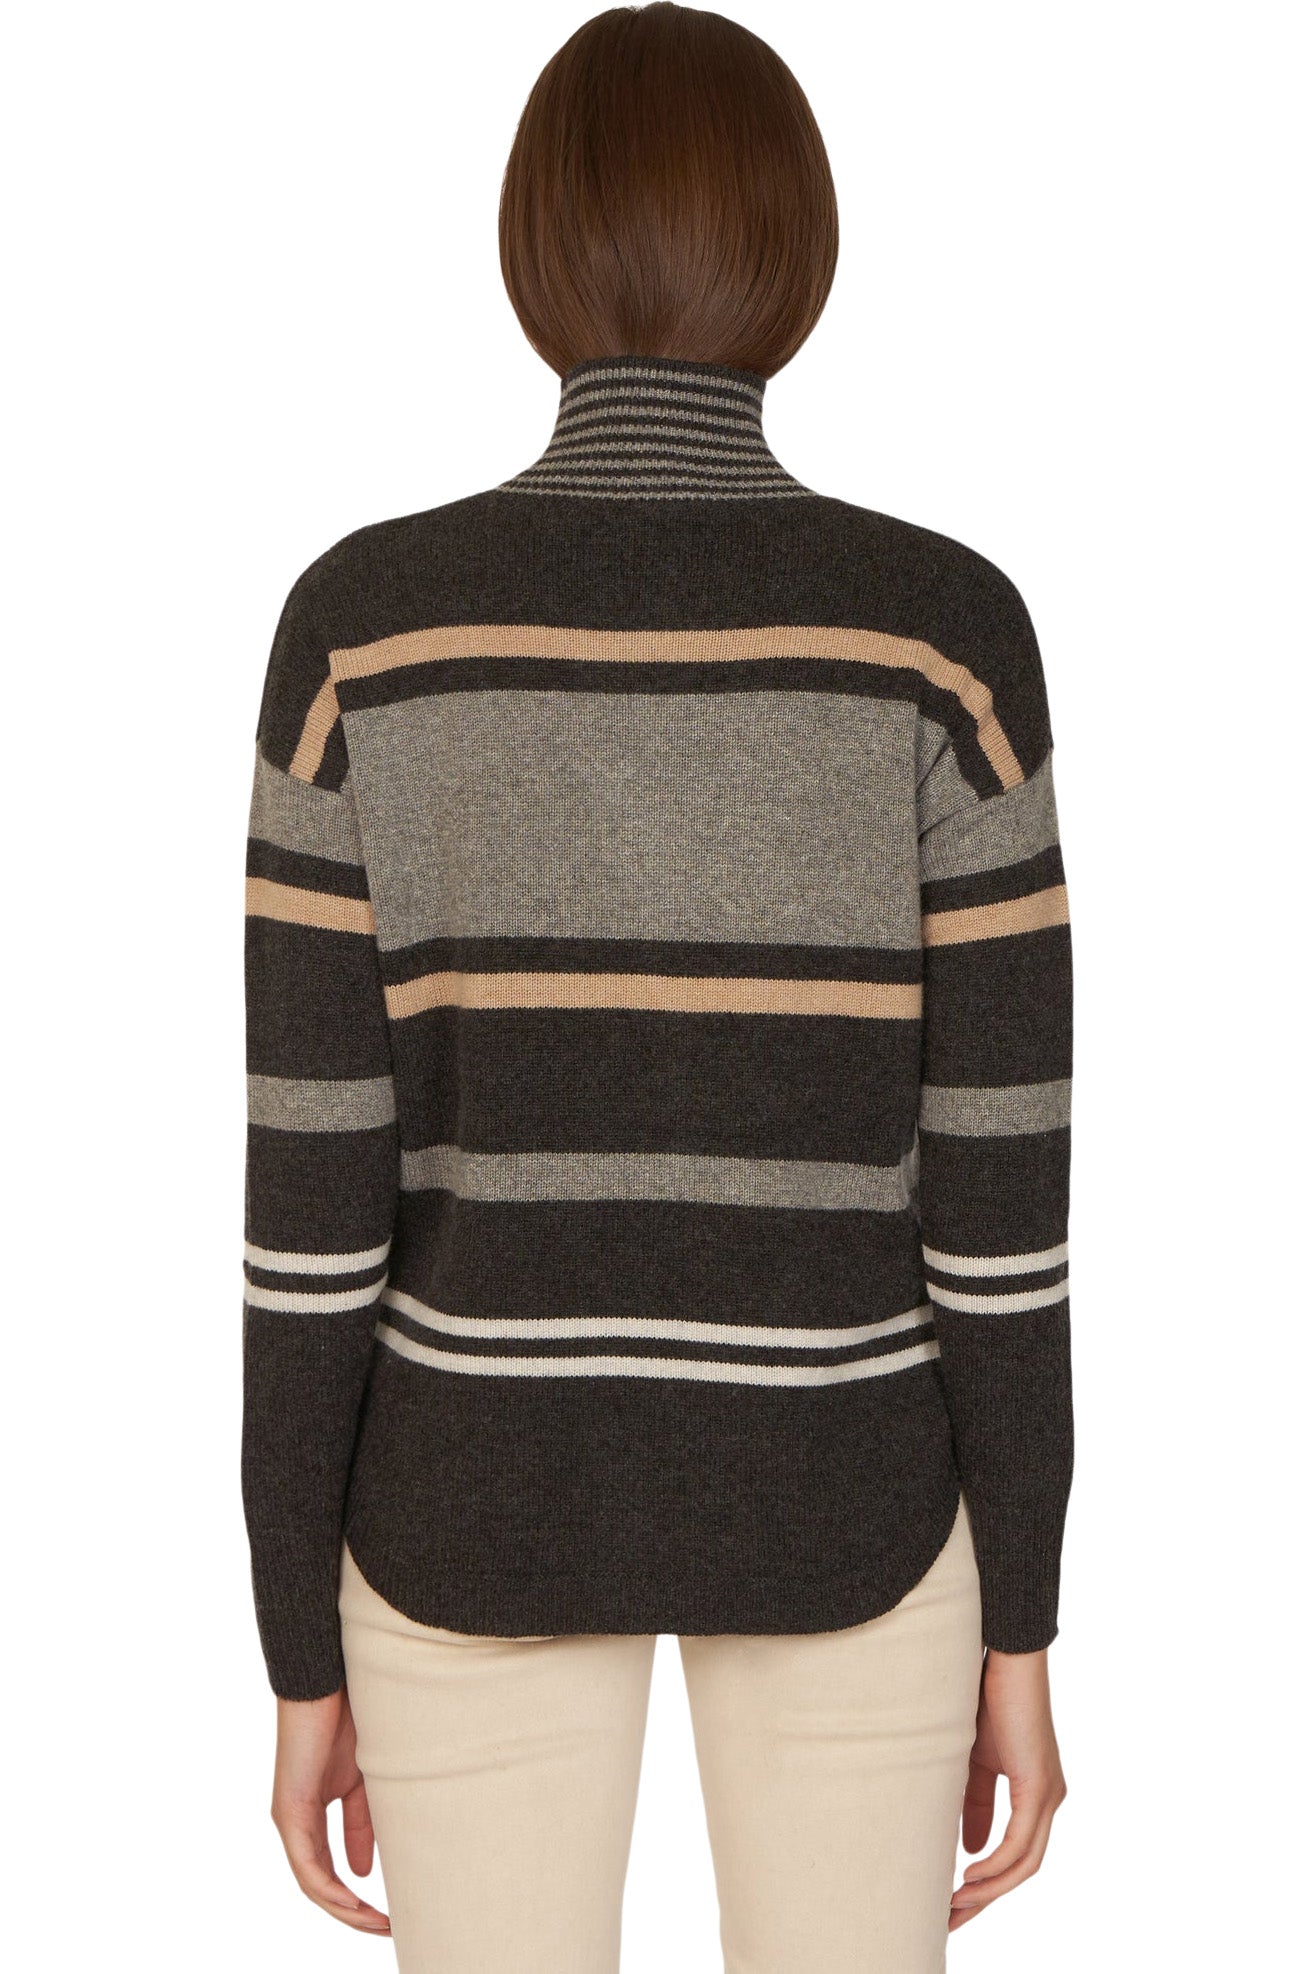 Autumn Cashmere Striped Mock w/ Shirttail in Pepper Combo